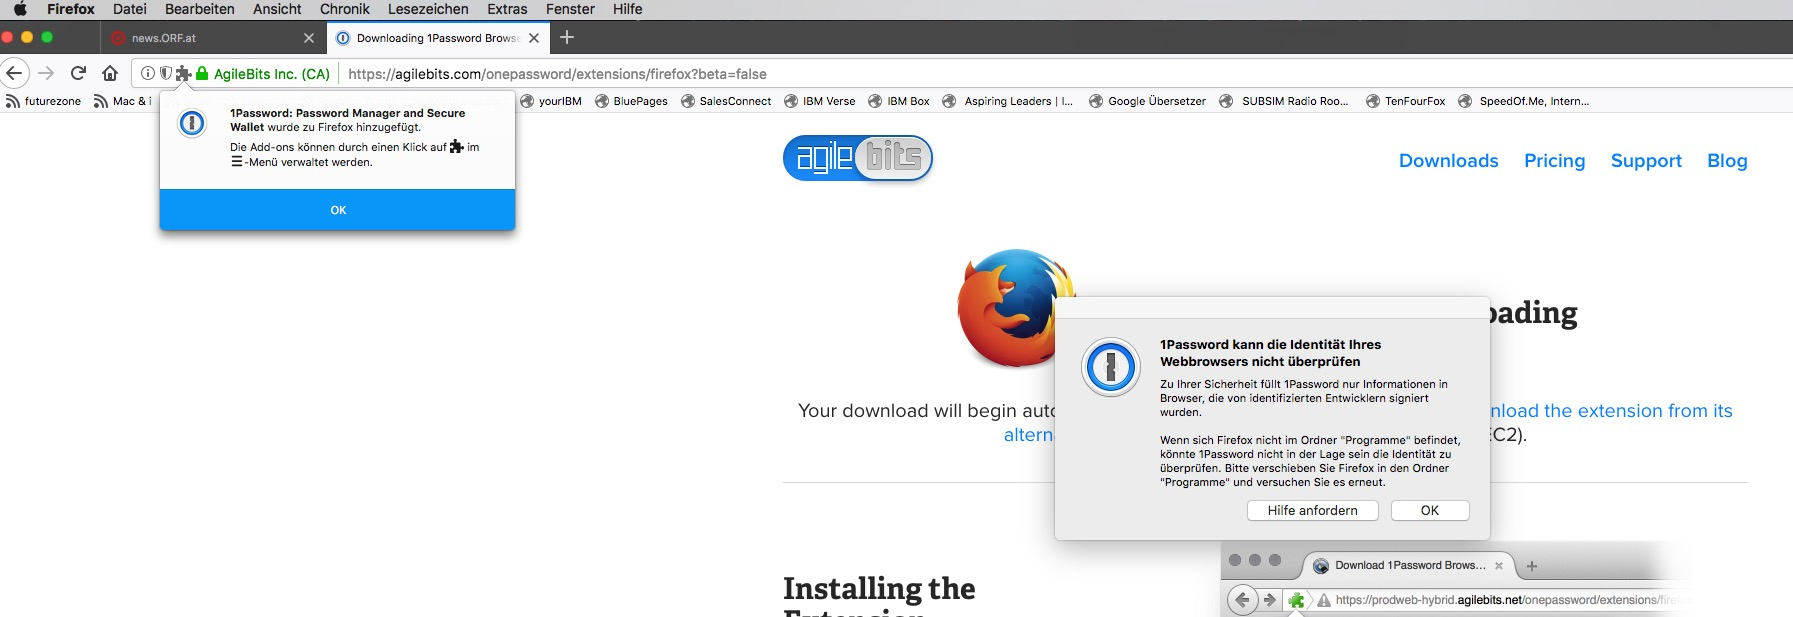 download firefox for mac 10.13.1